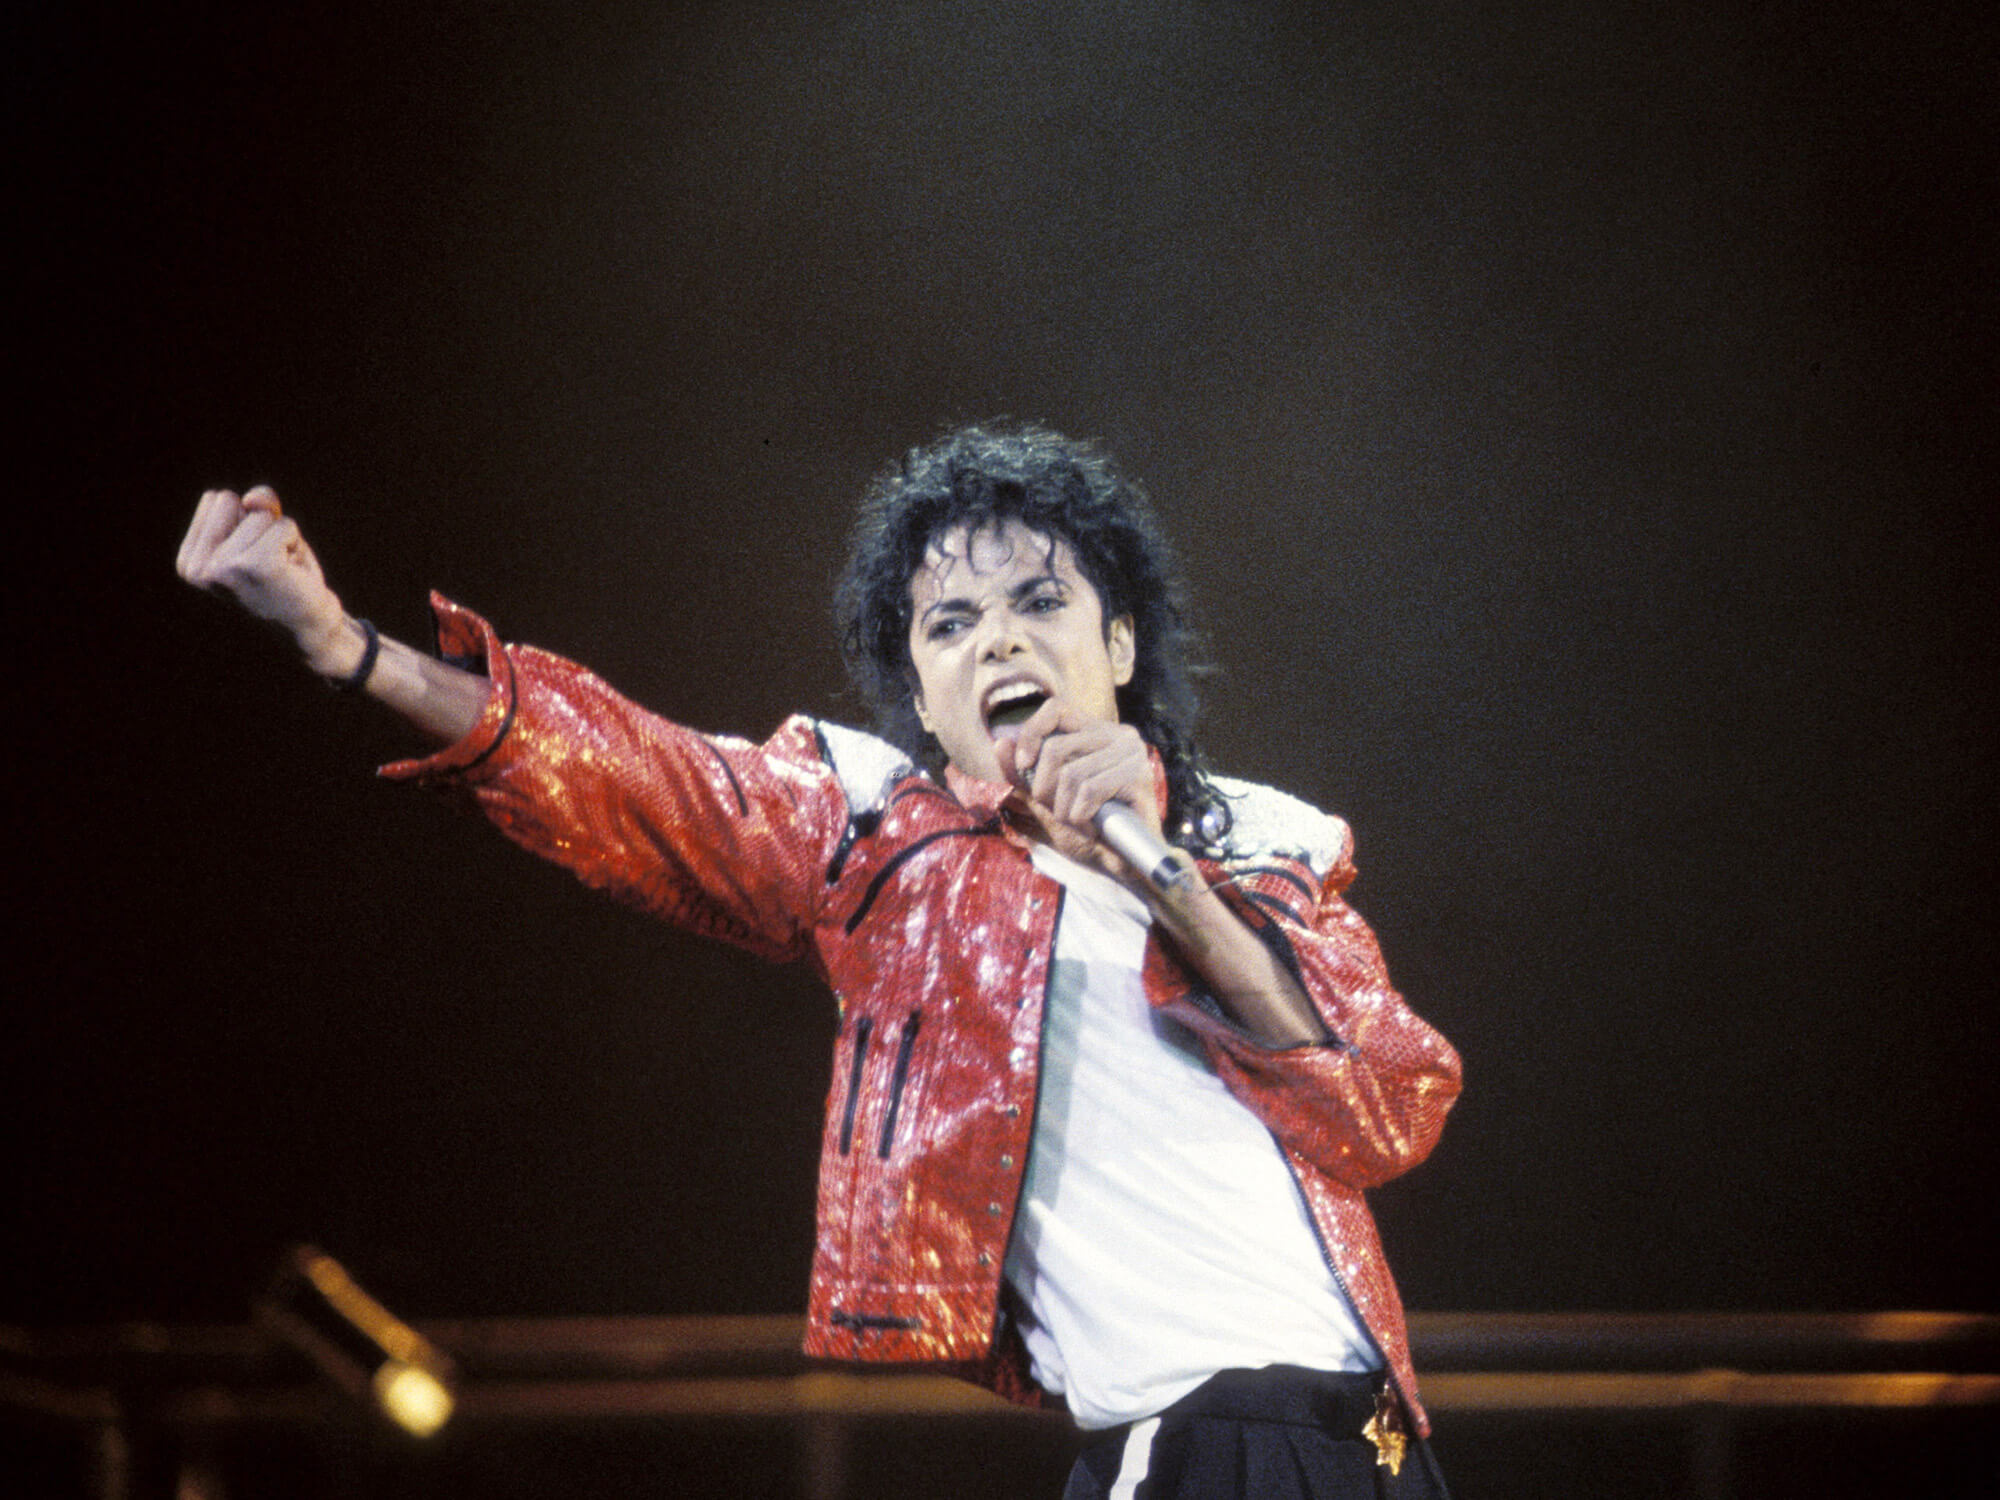 Michael Jackson in his famous bright red jacket. He is on stage, holding a mic in one hand and his other hand up in the air clenched in a fist as he is singing.